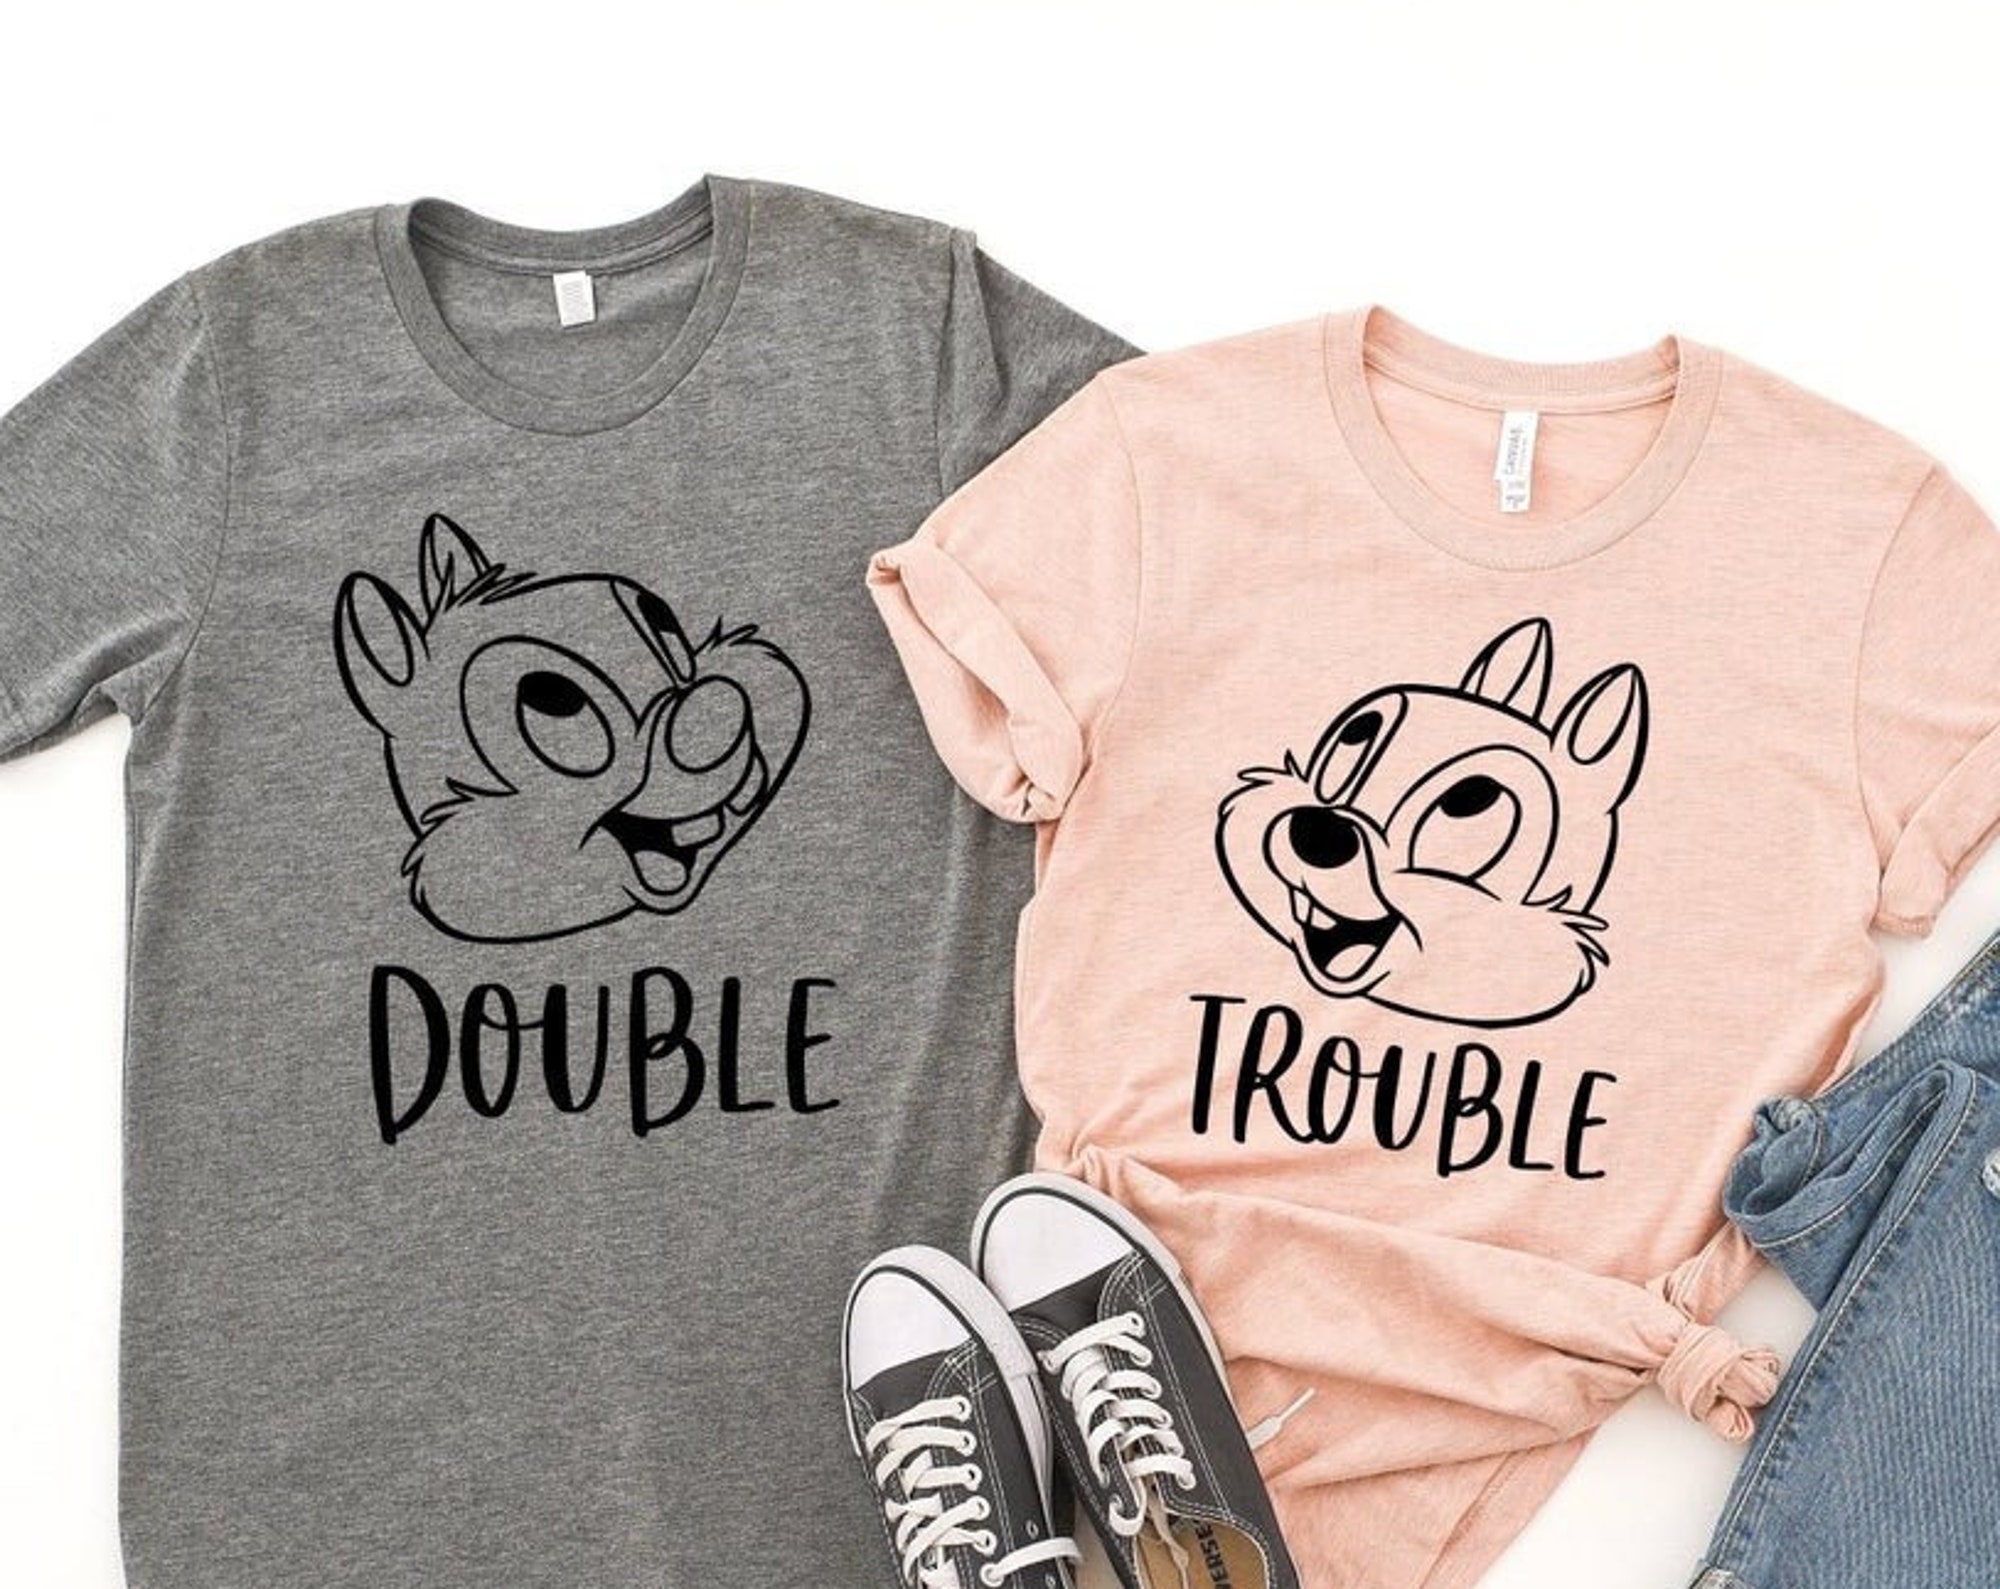 Discover Chip and Dale Kids Disney Shirts, Disney Couple Shirt, Double and Trouble Disneyworld Shirts Family, Disneyland Shirt, Matching Disney Shirt